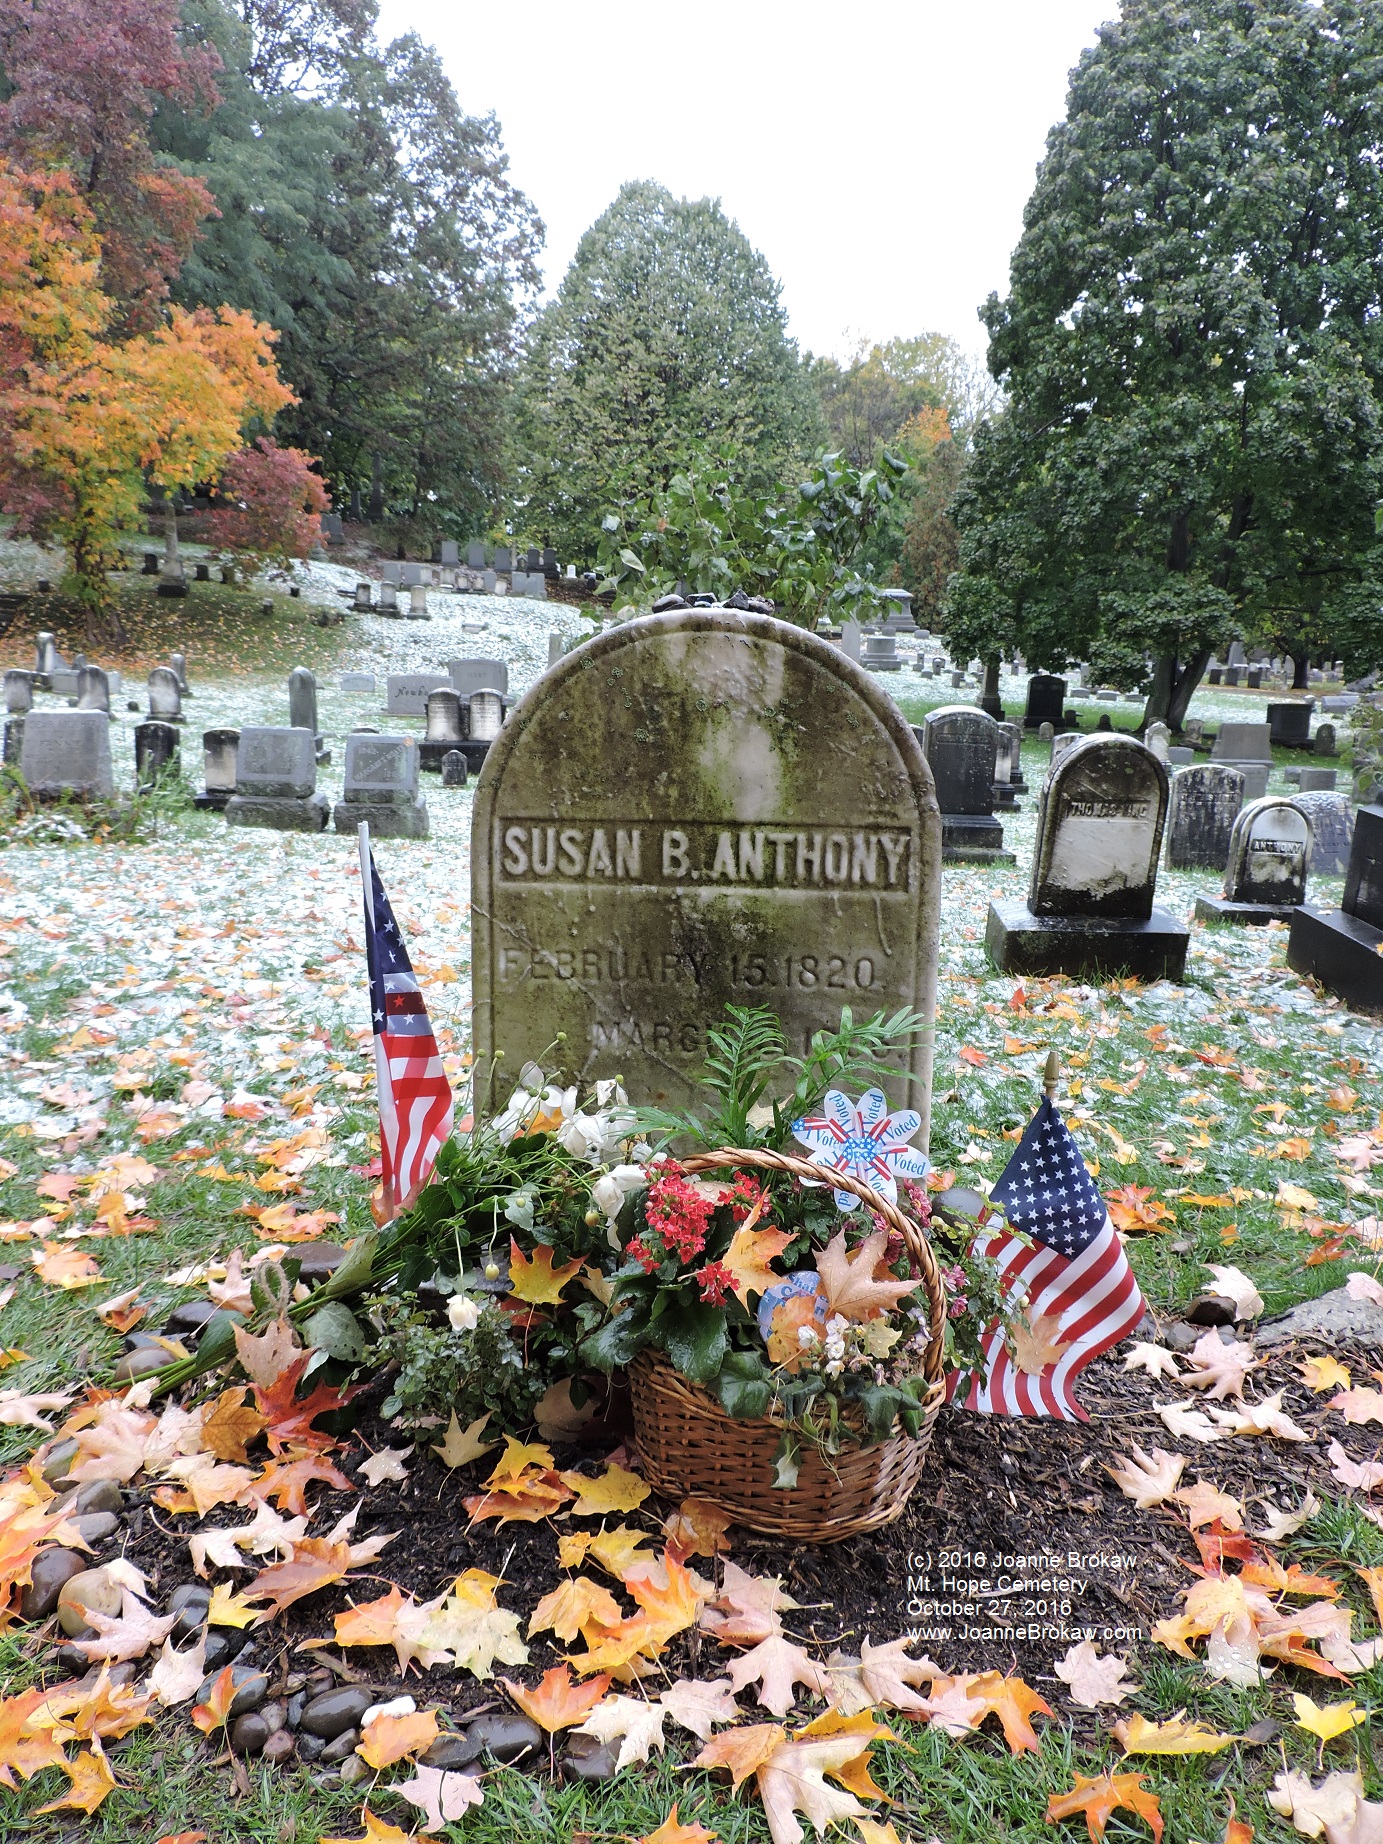 The grave site of Susan B. Anthony, in October 2016.